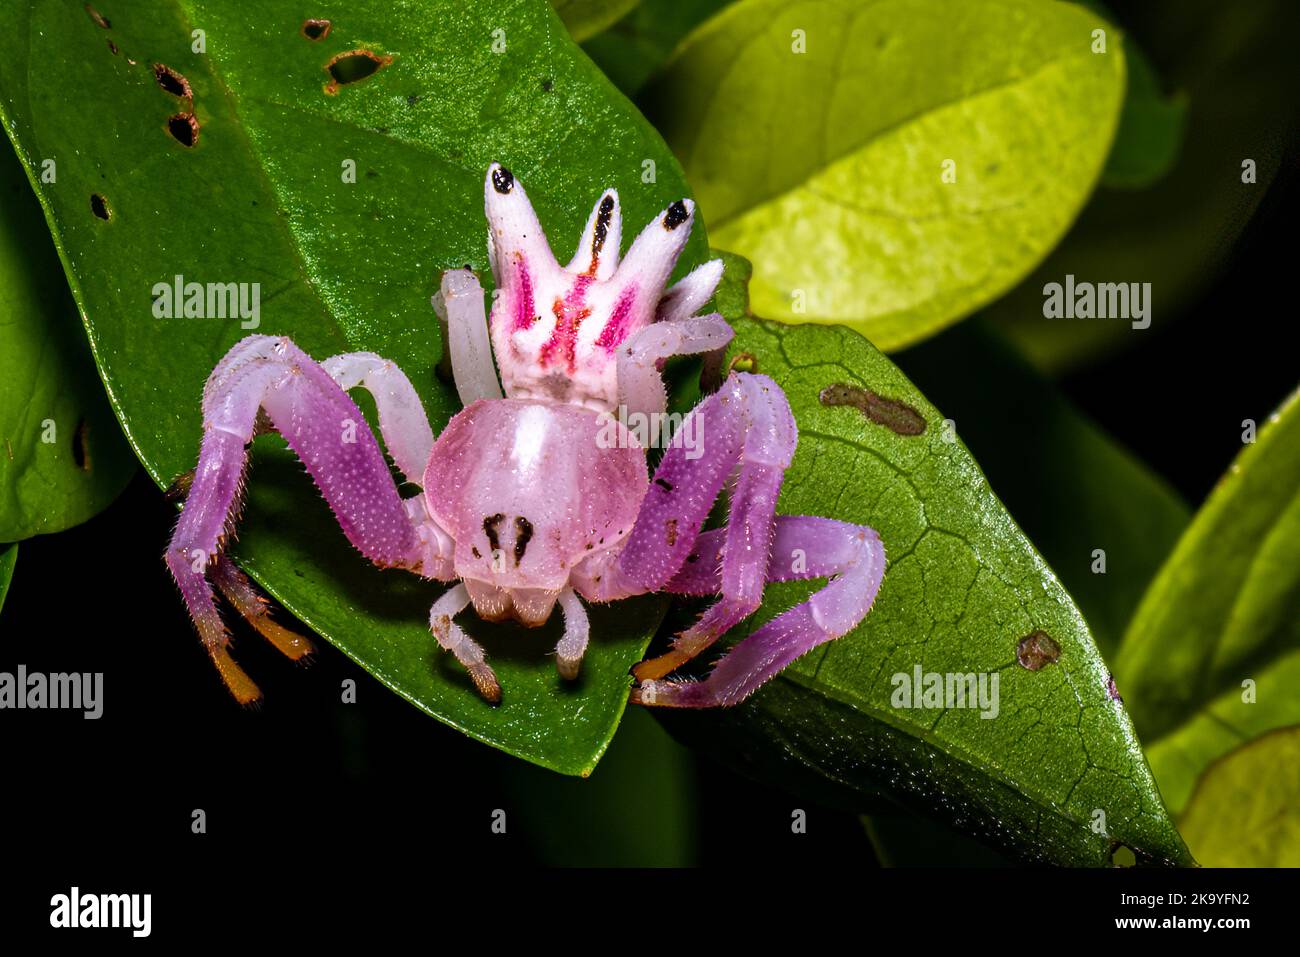 Tiny Epicadus-heterogaster / pink crab spider on a green leaf macro photography Stock Photo